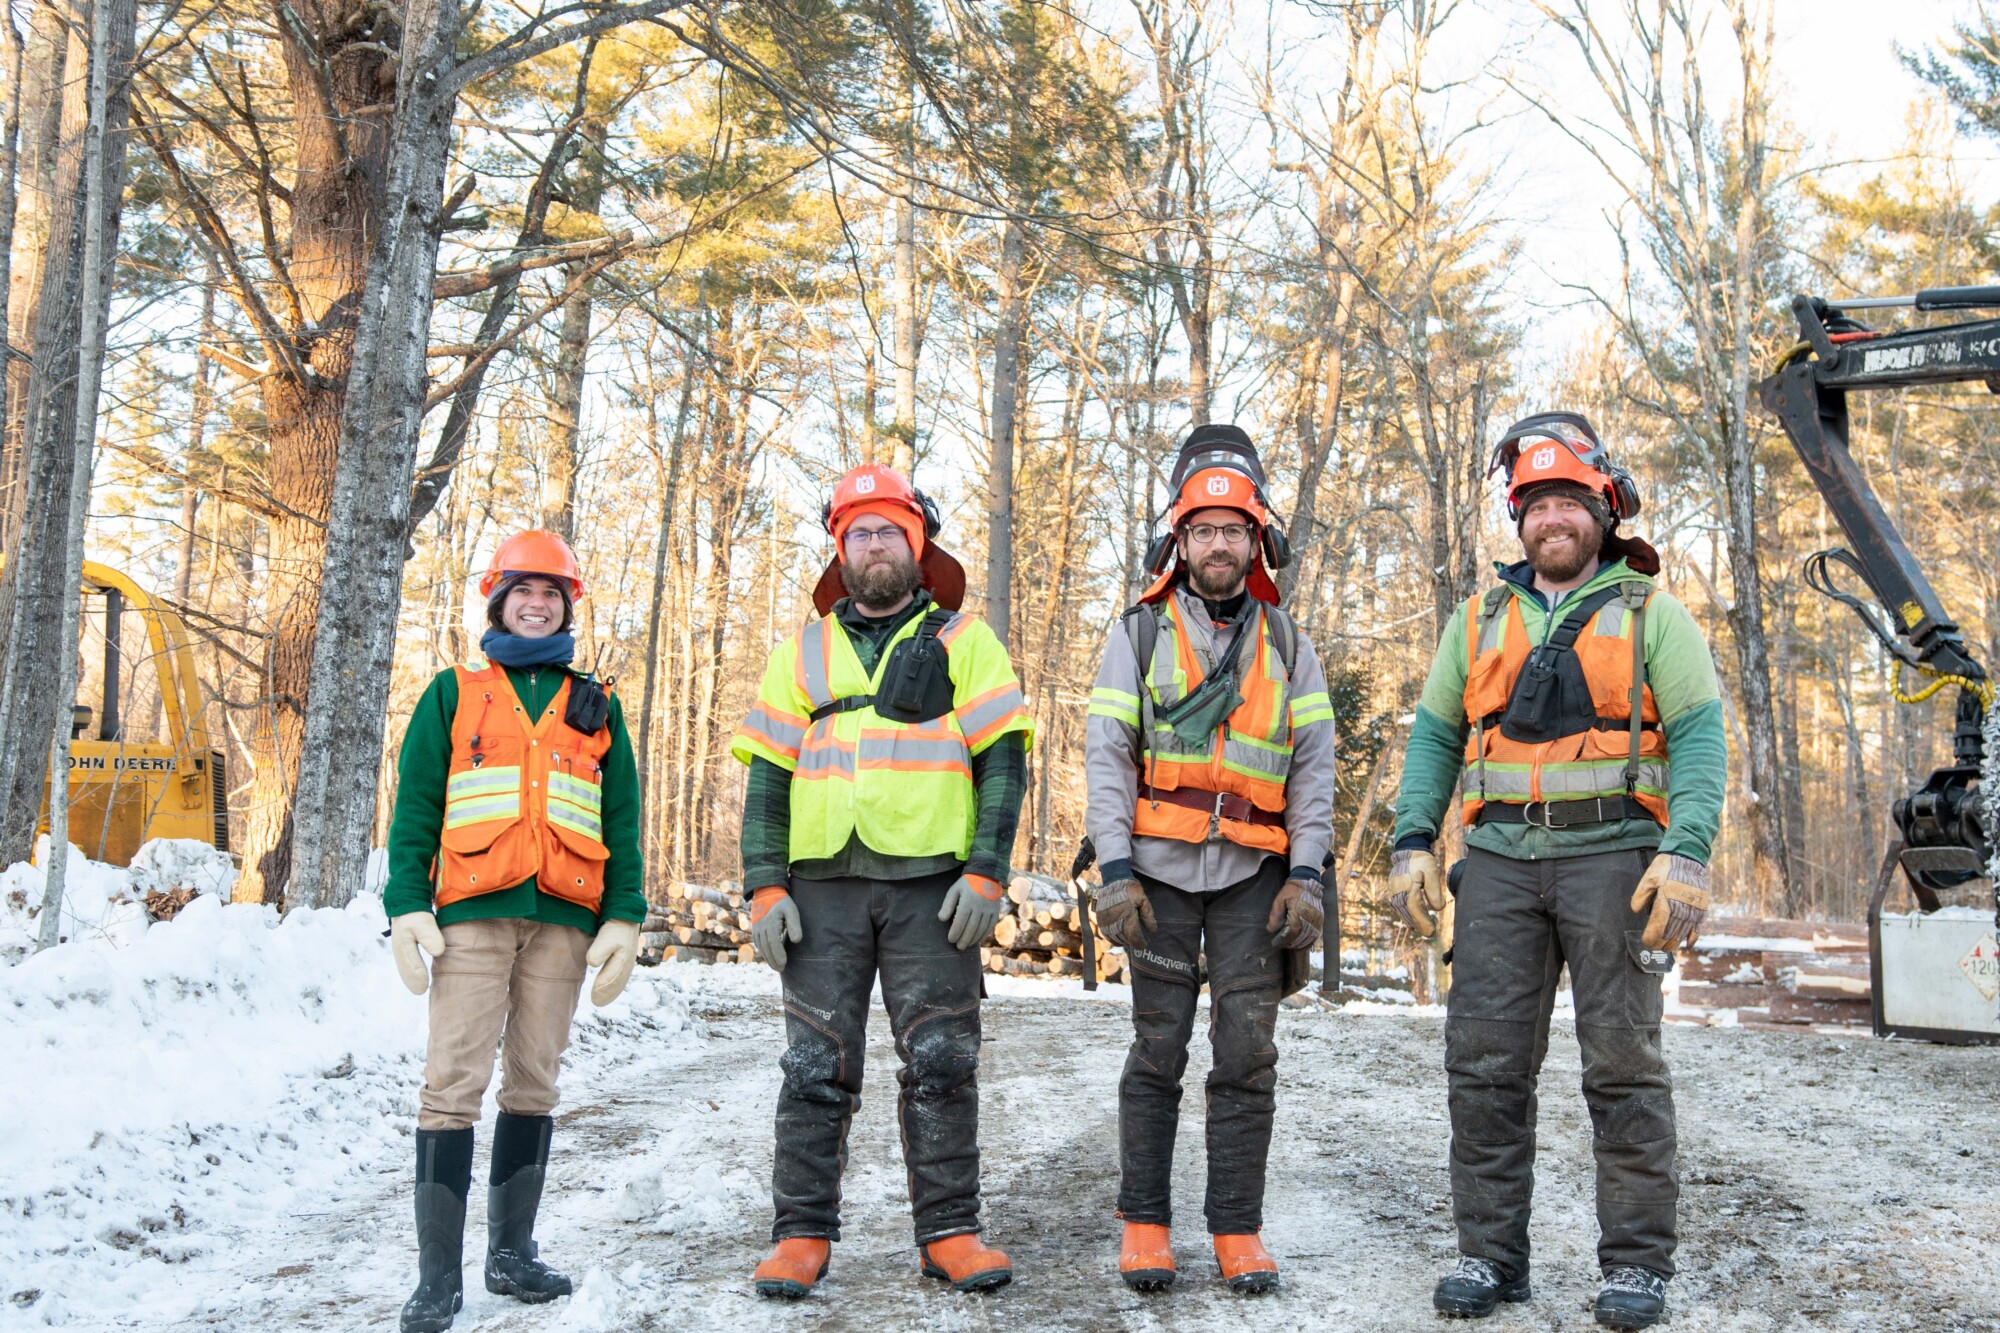 Do you love to work outdoors? Enjoy making things with your hands? Love to drive big machines, or want to use technology to solve environmental problems? A career in Vermont’s forest economy could be a great fit for you! Photo by Erica Houskeeper.